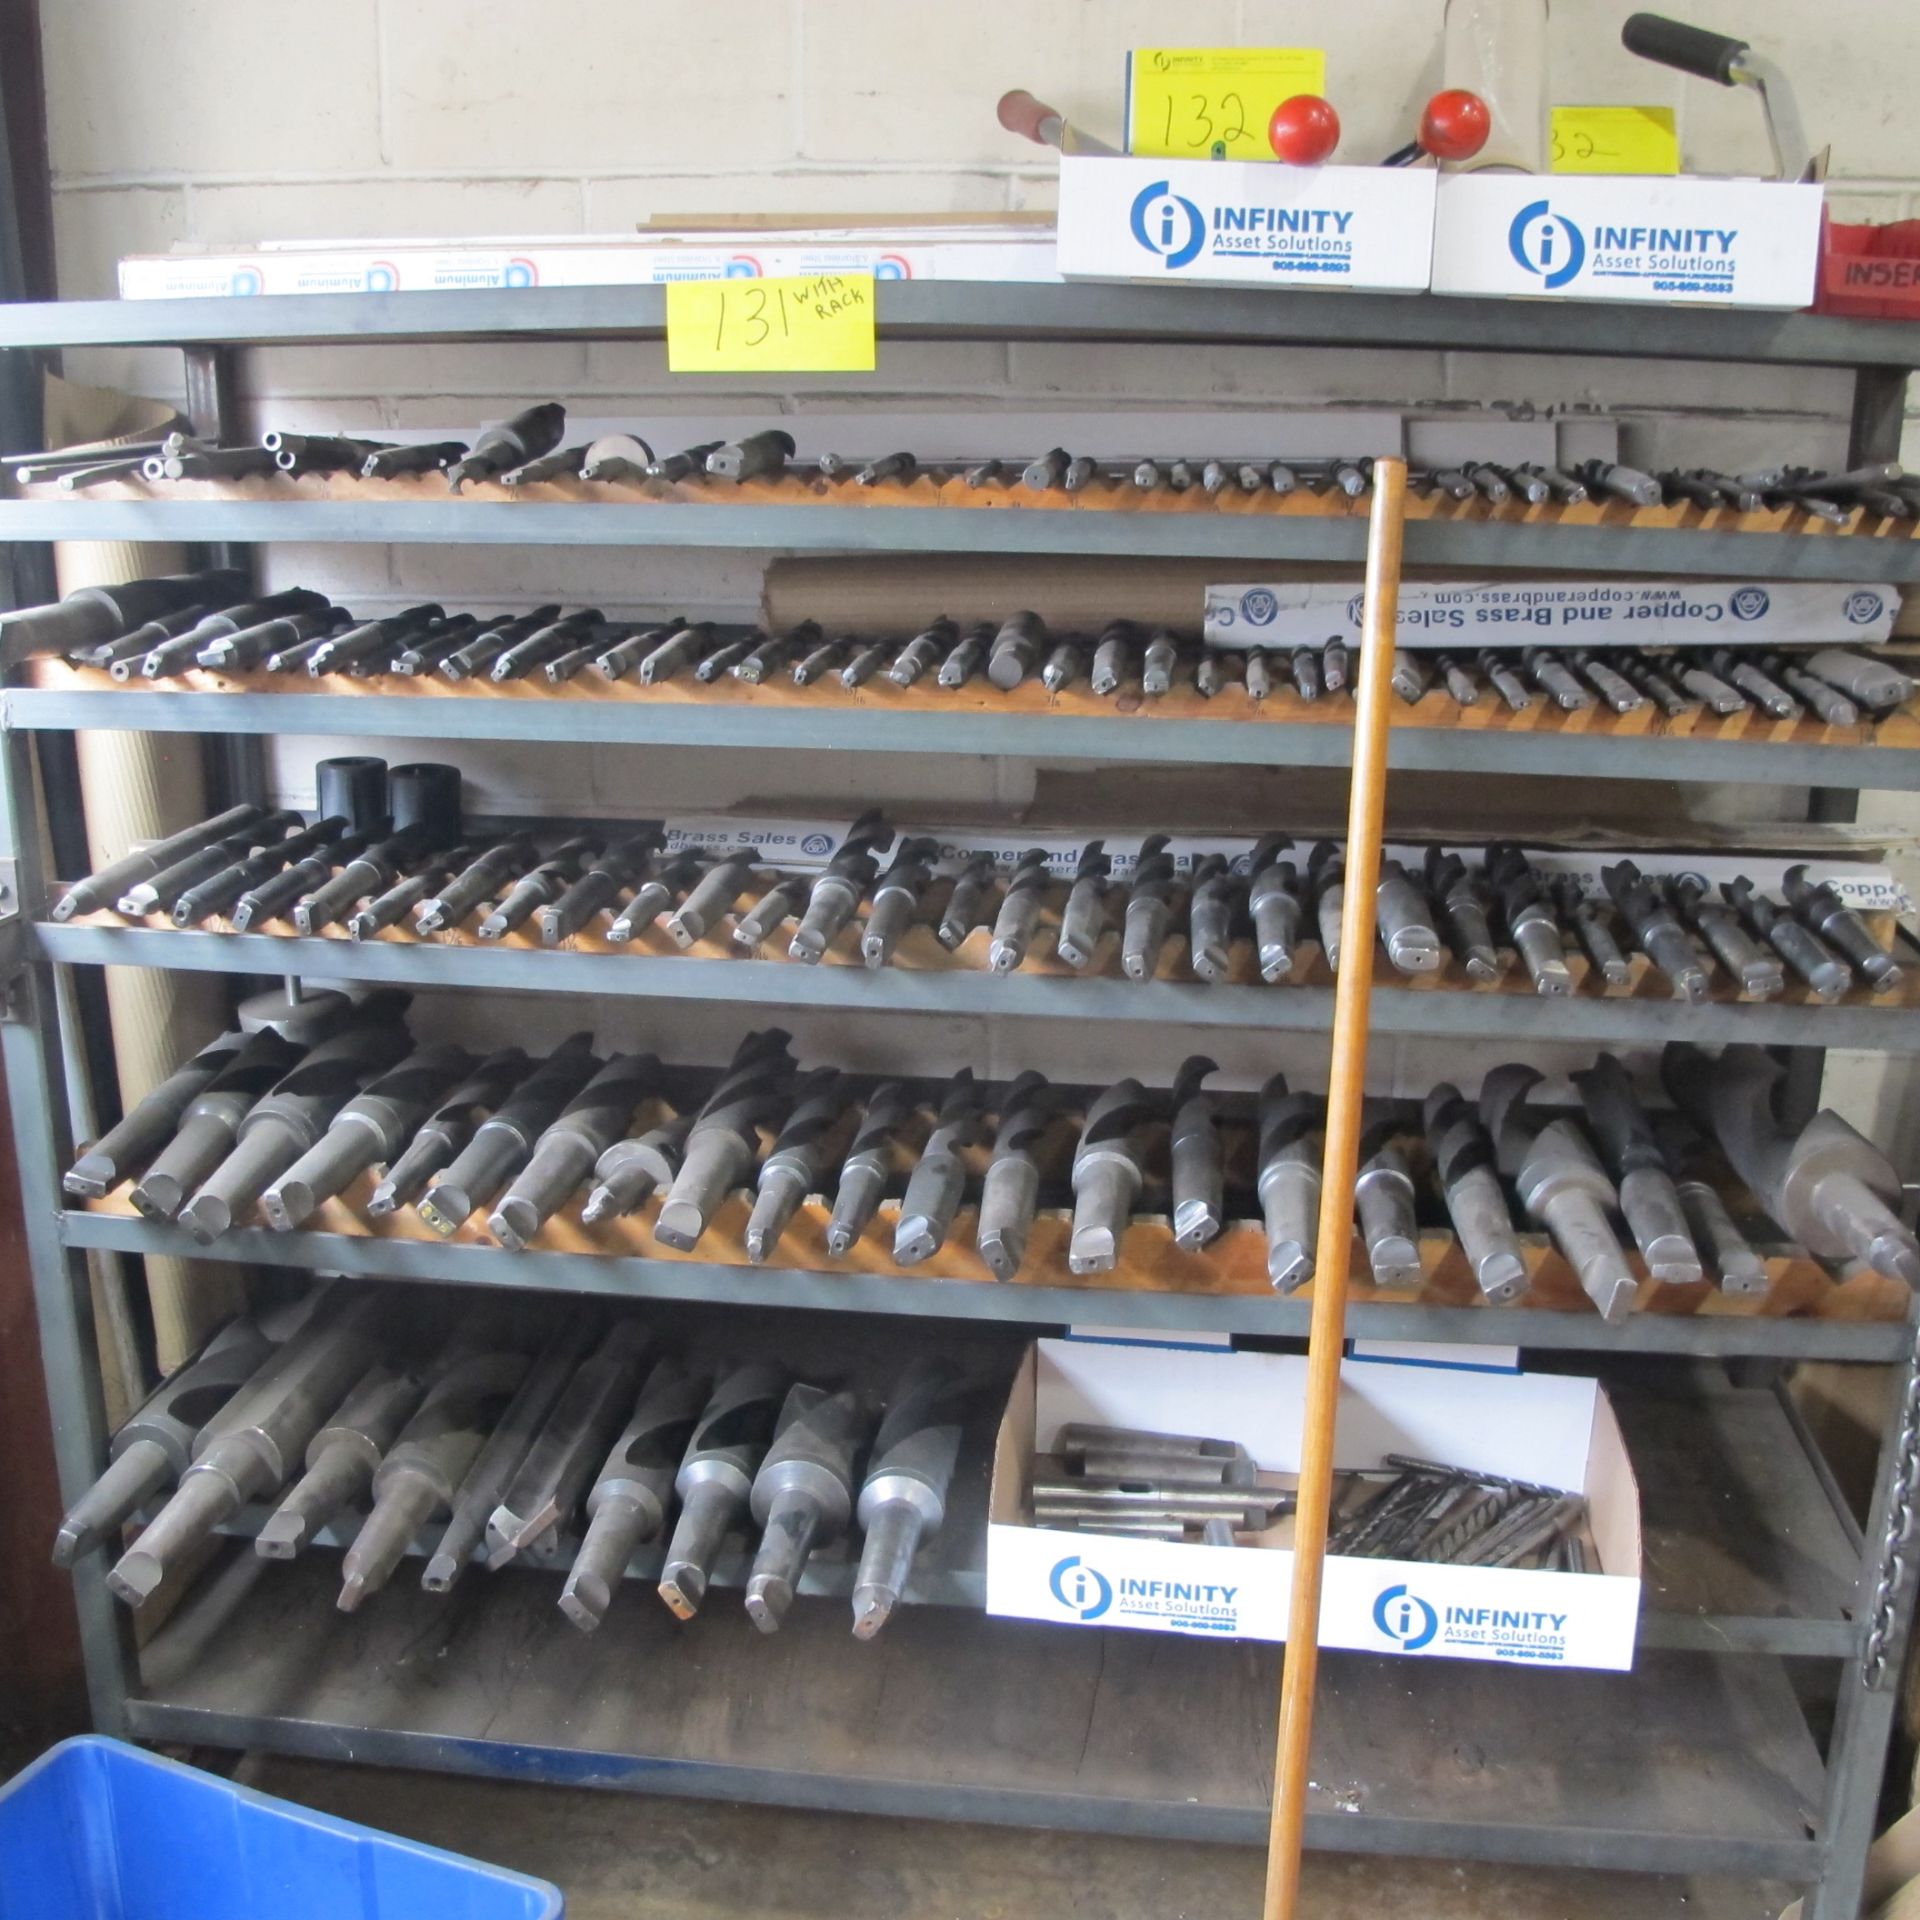 7 LEVEL RACK W/HIGH SPEED DRILLS, BORING DRILLS AND TOOL HOLDERS